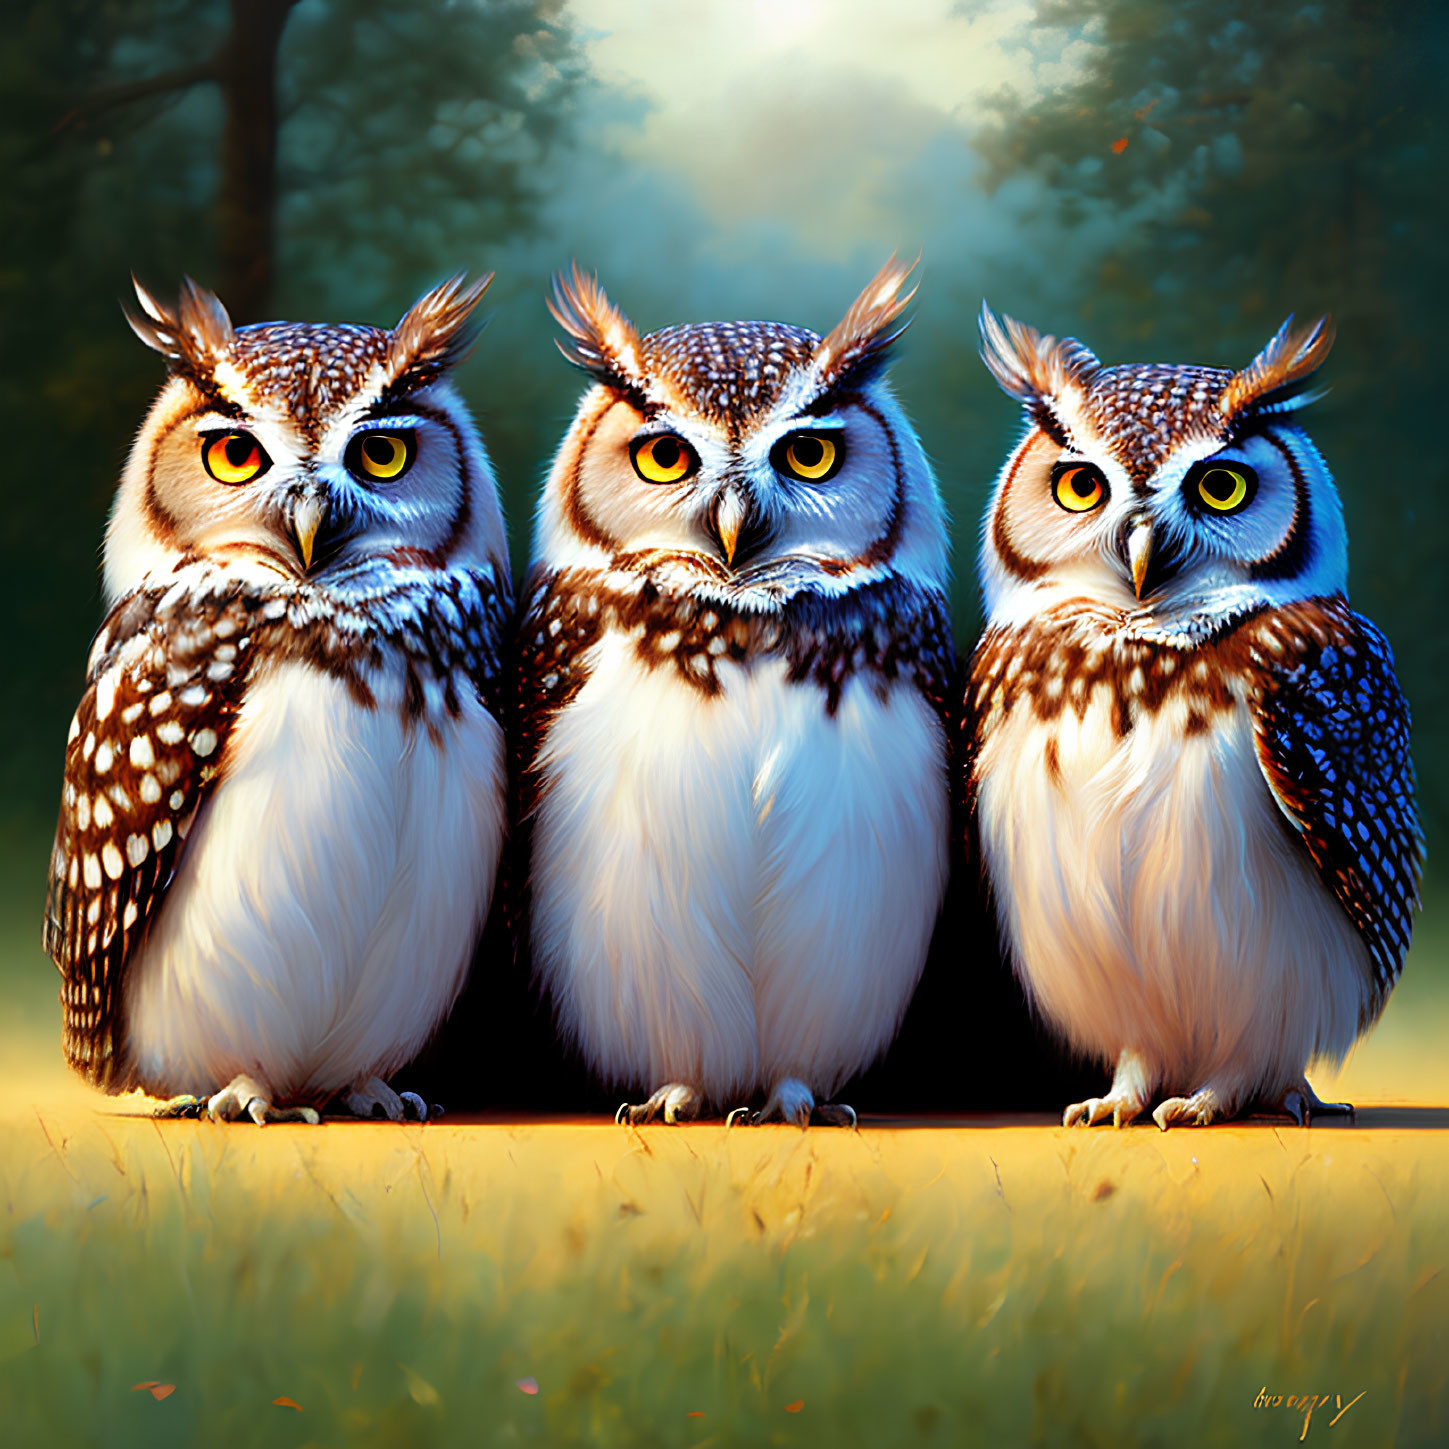 Illustrated Owls with Vibrant Eyes in Dusk Forest